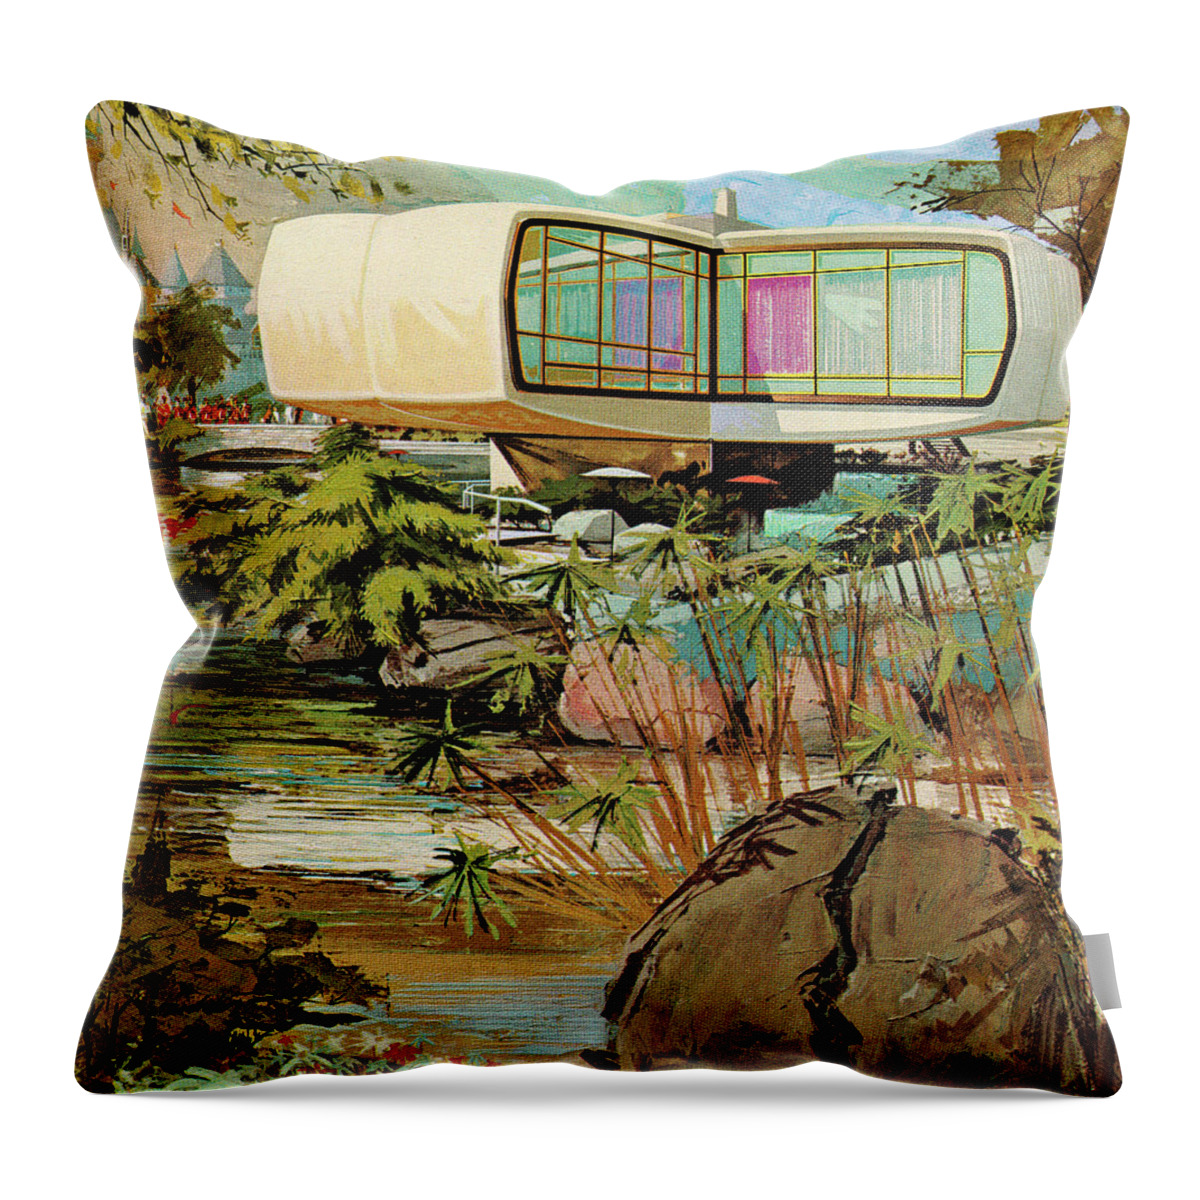 Architecture Throw Pillow featuring the drawing Futuristic House by CSA Images